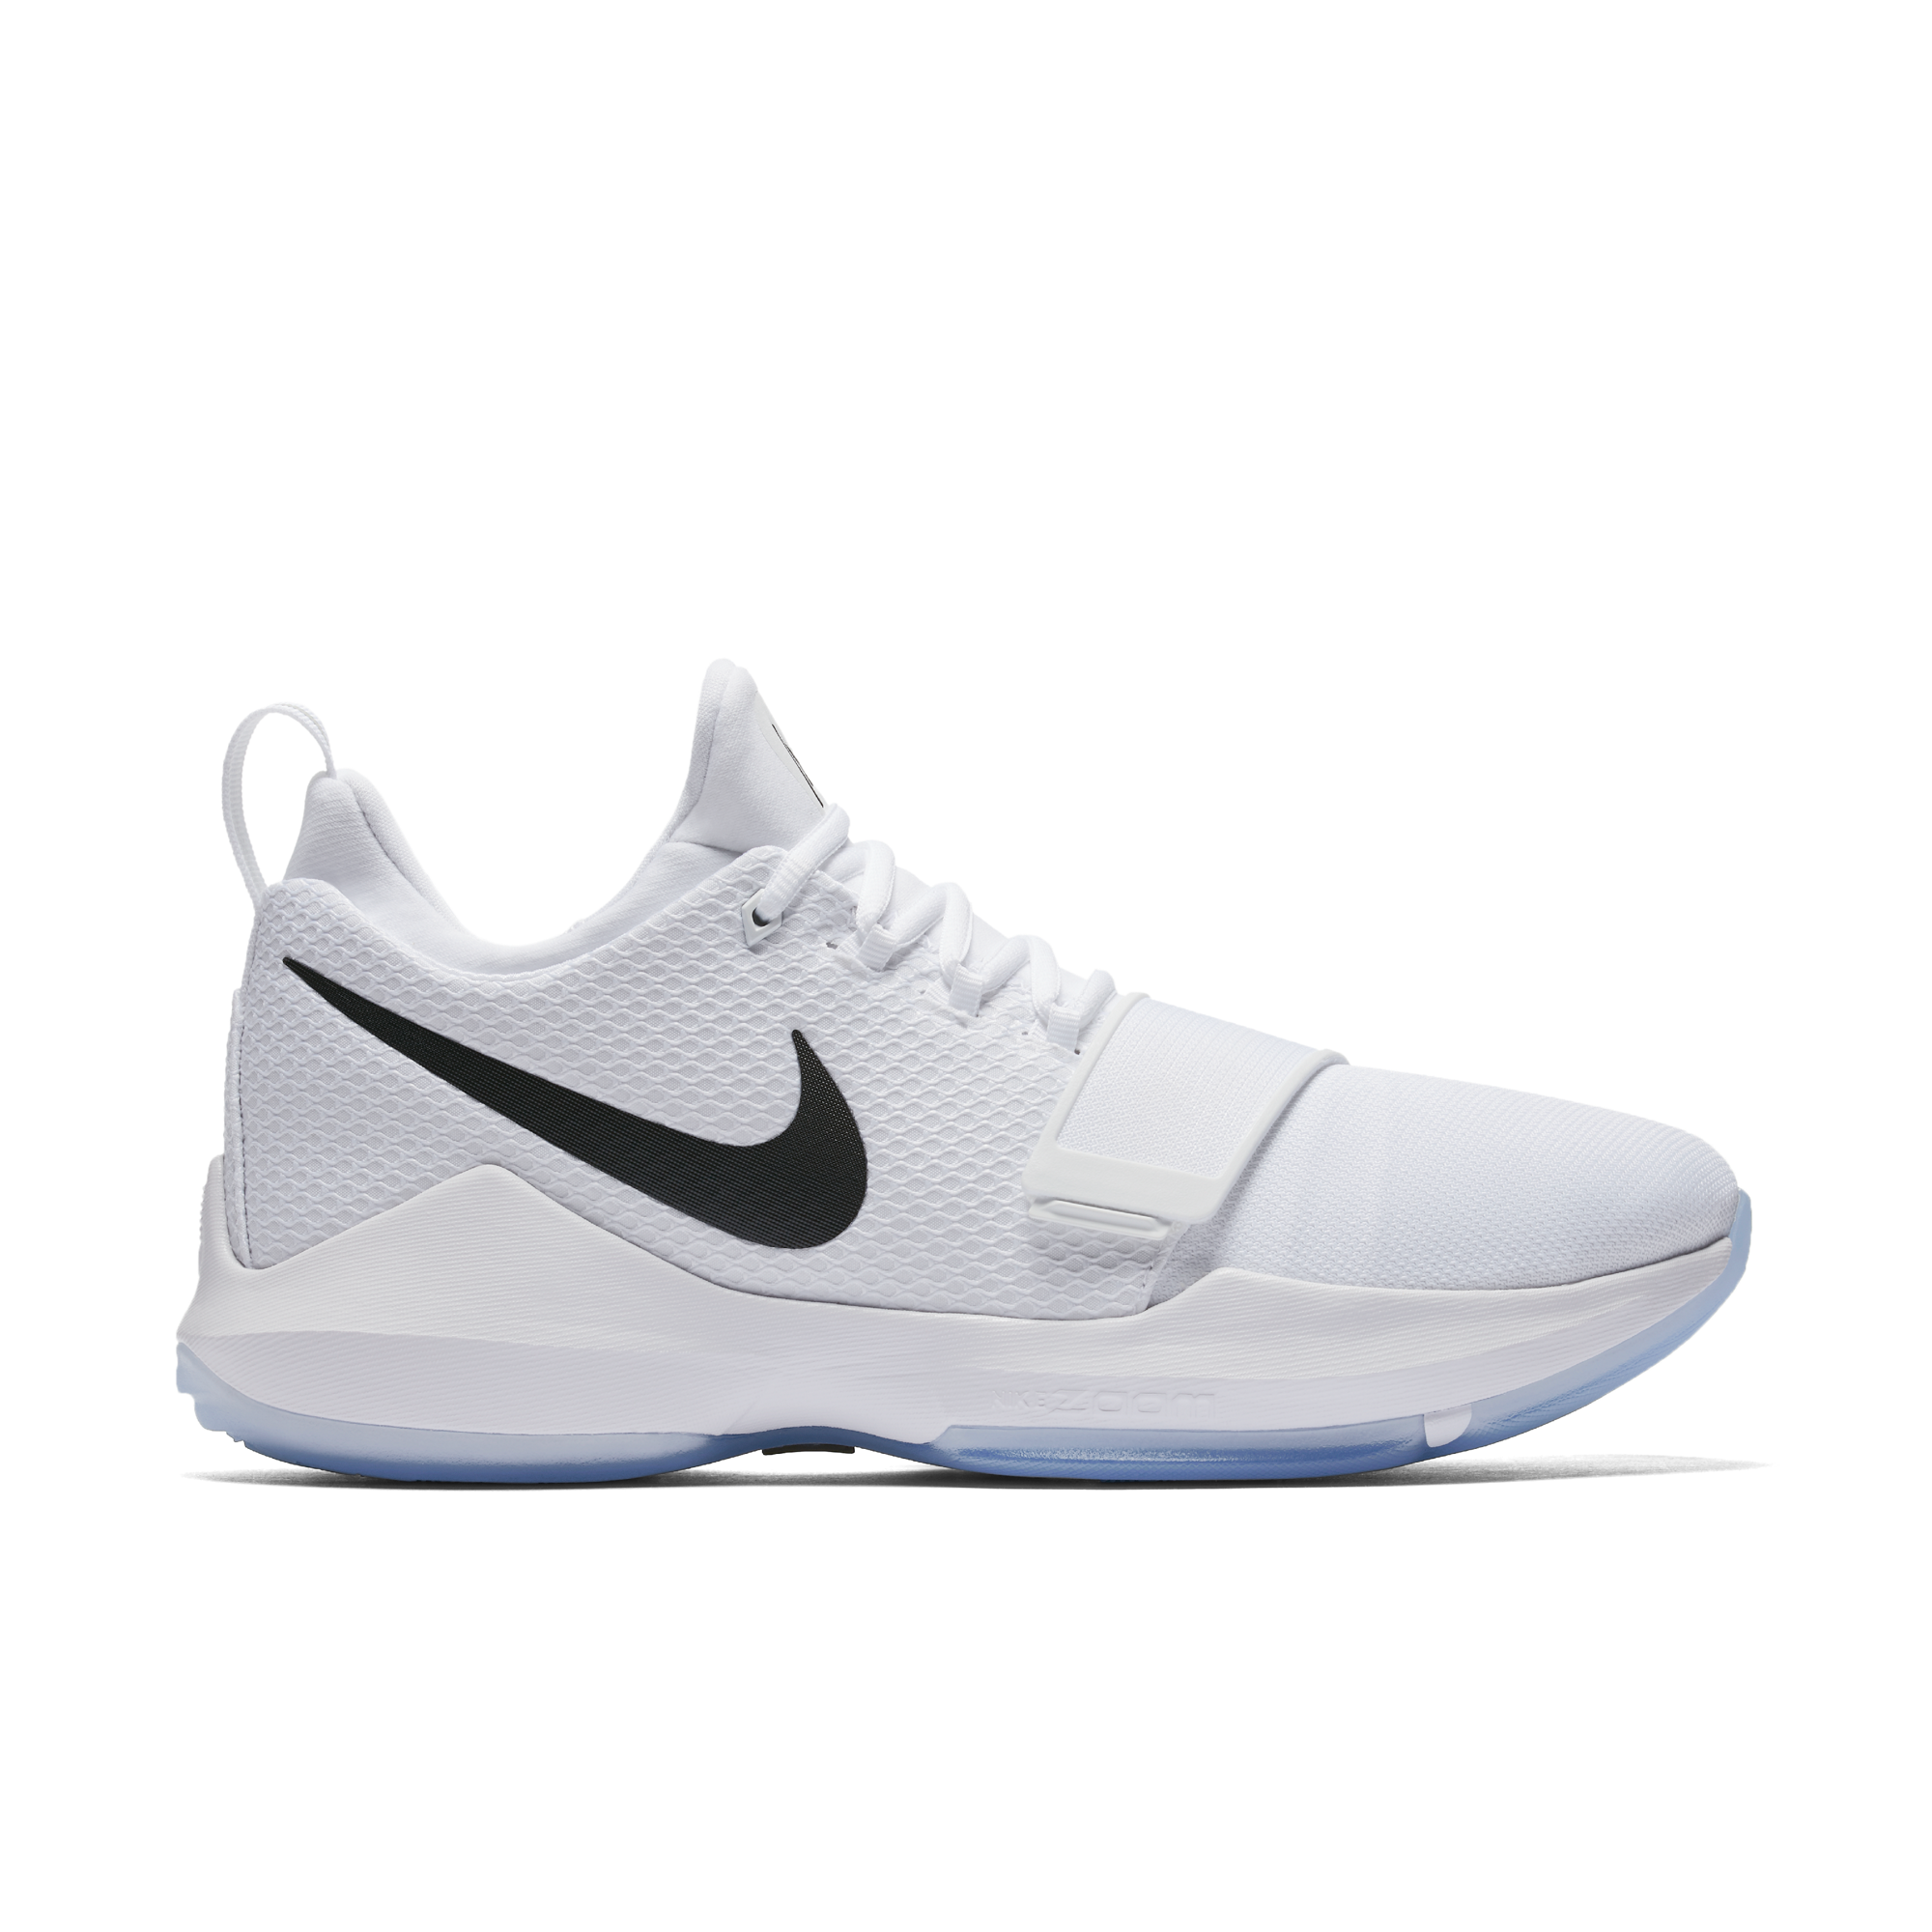 pg 1 size 12